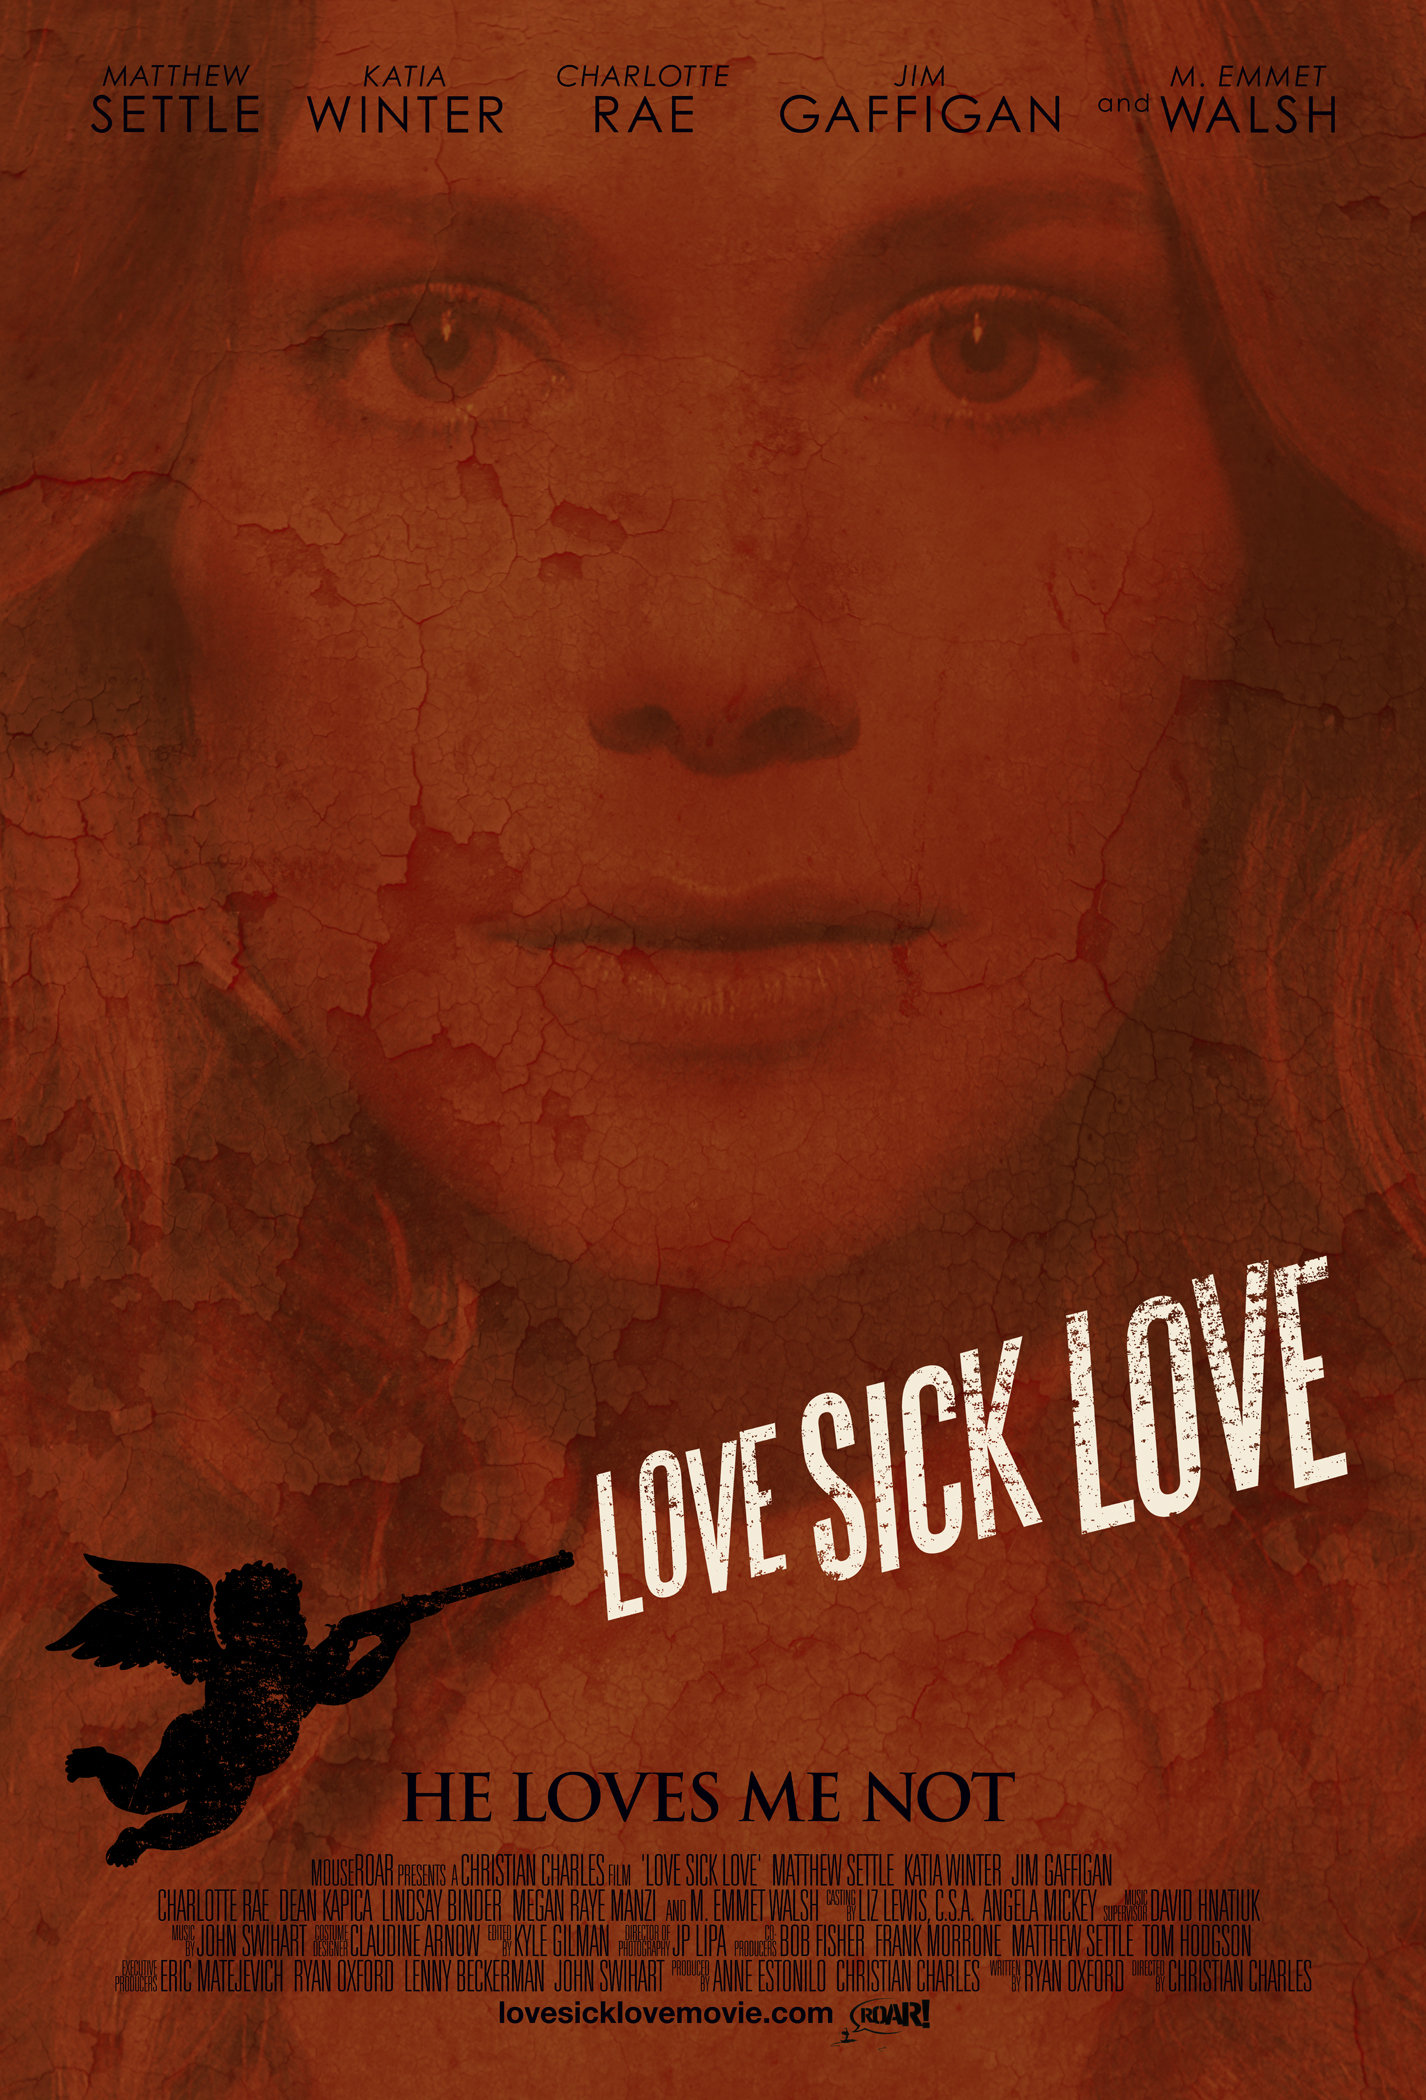 Love Sick Love Official Theatrical Poster - Starting April 19, 2013